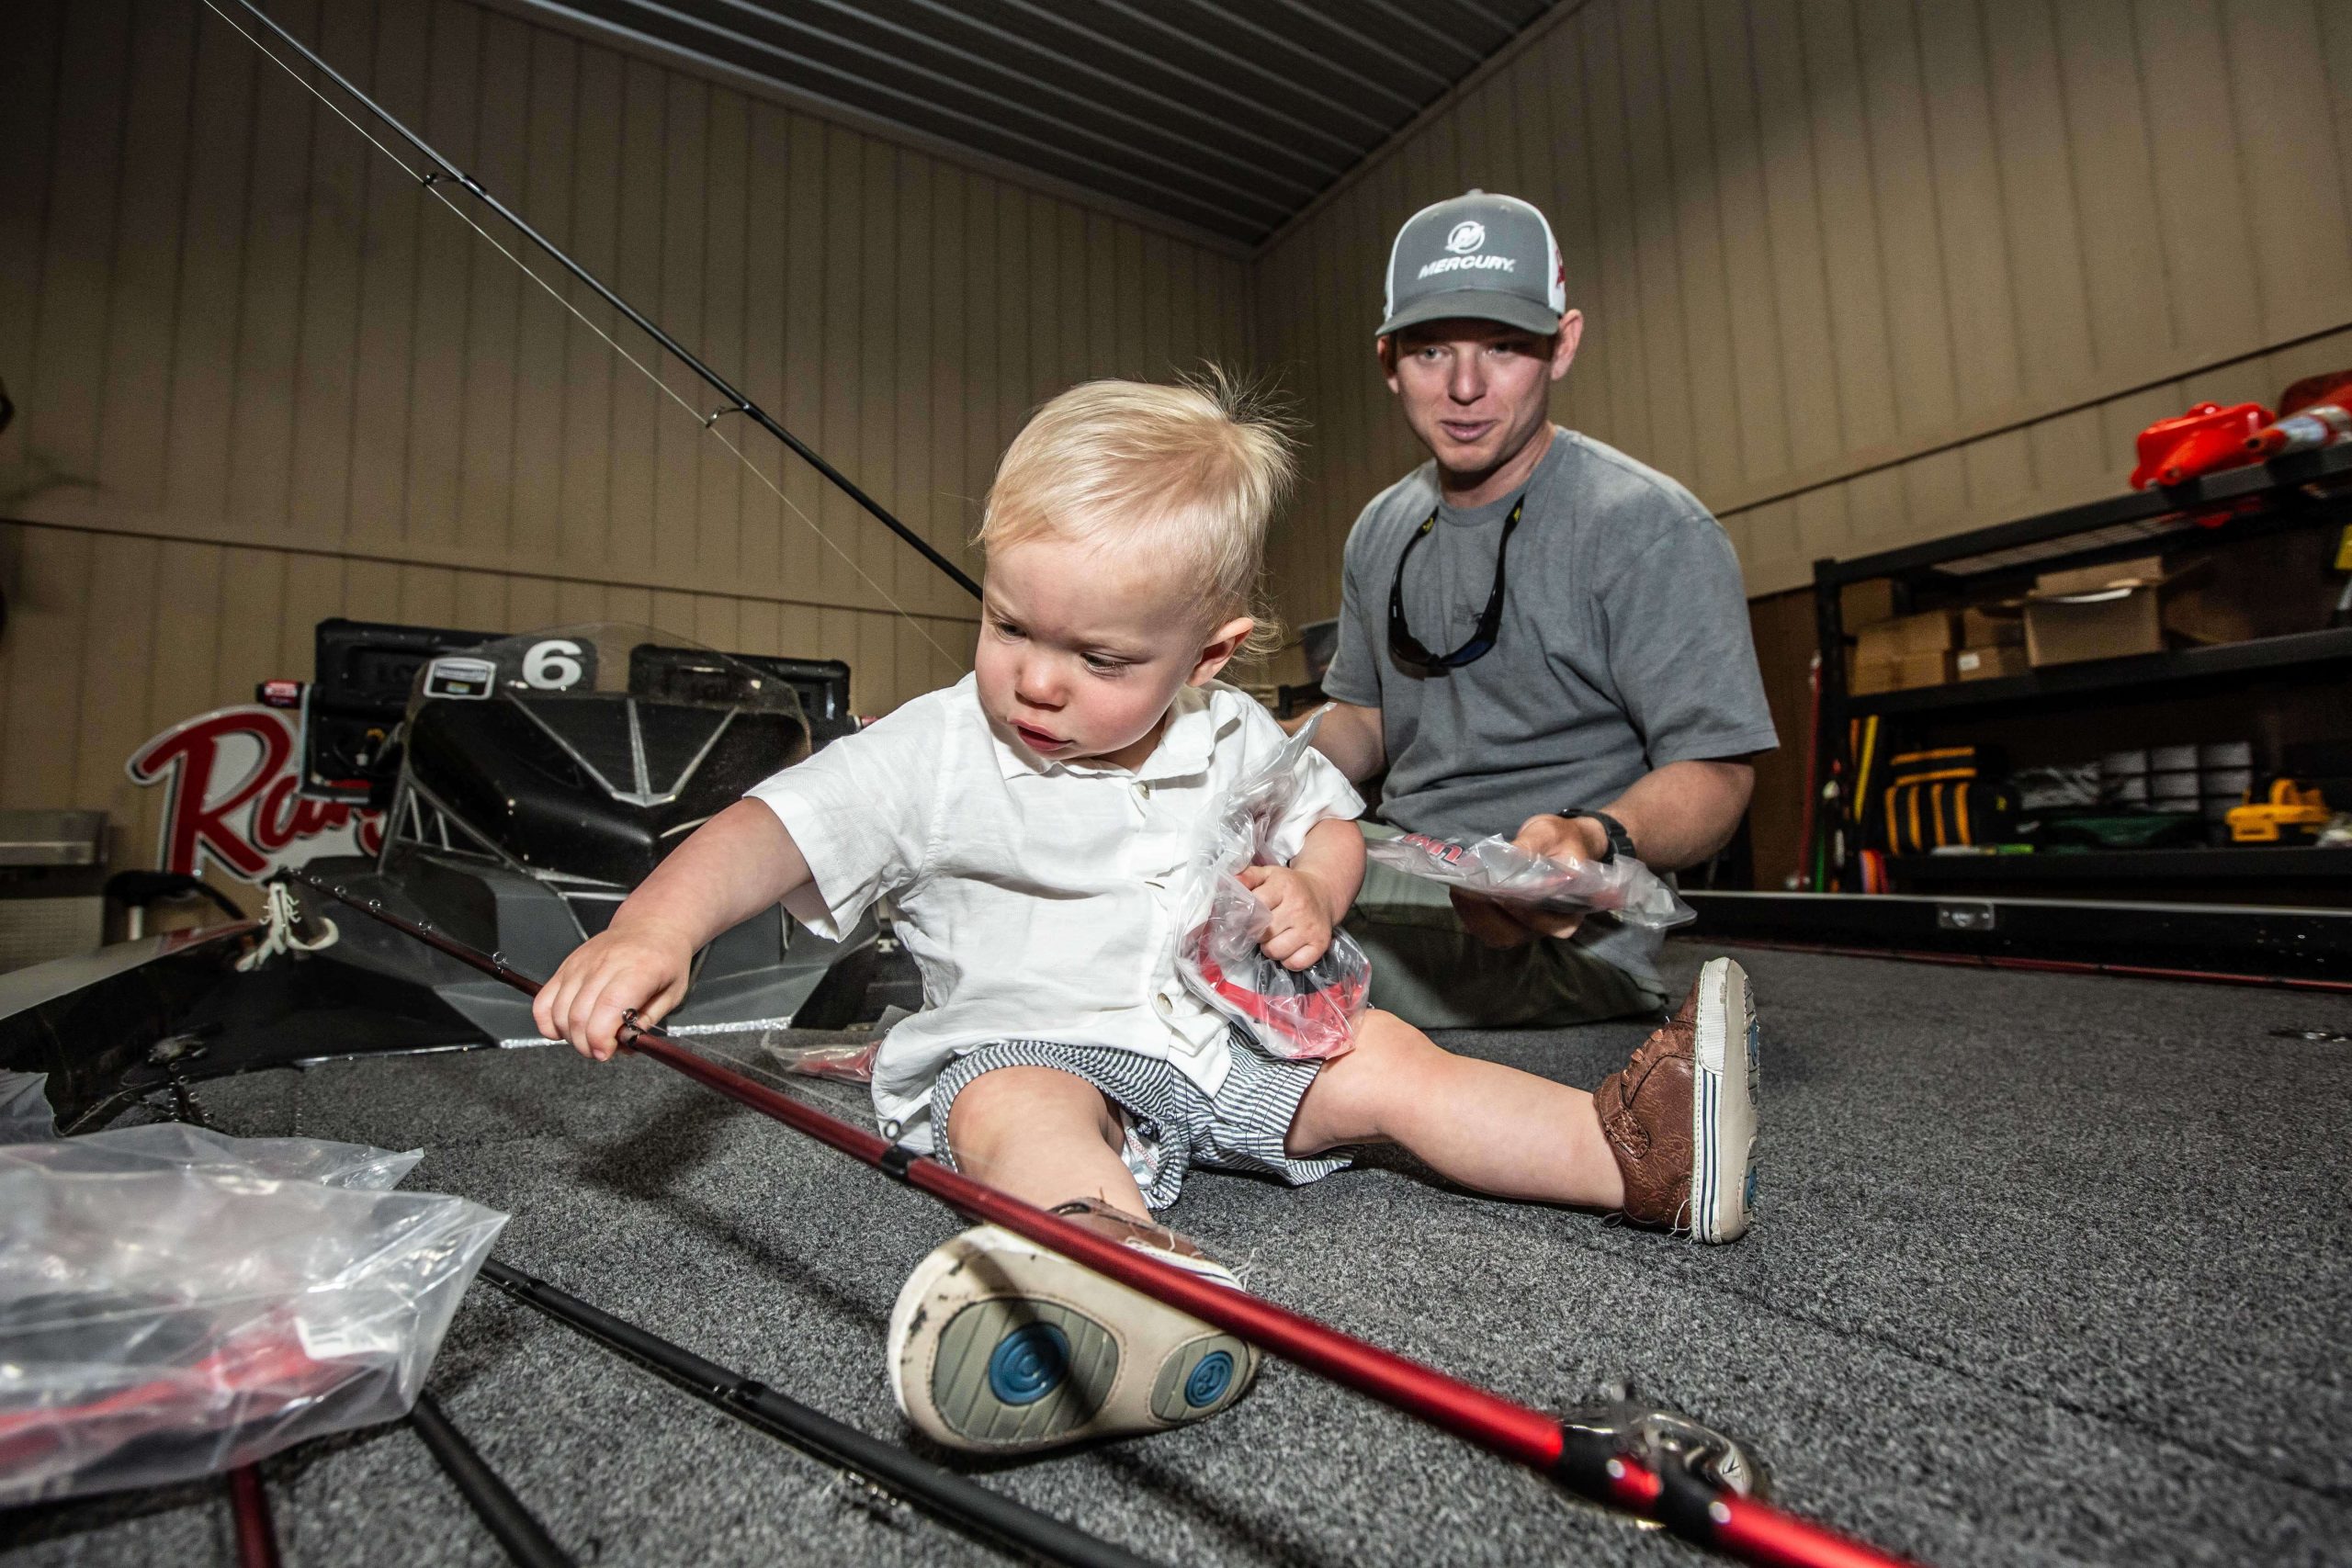 Bassmaster Elite Series angler Micah Frazier and his young son Huck spend some time getting familiar with pro's favorite bass fishing gear. 